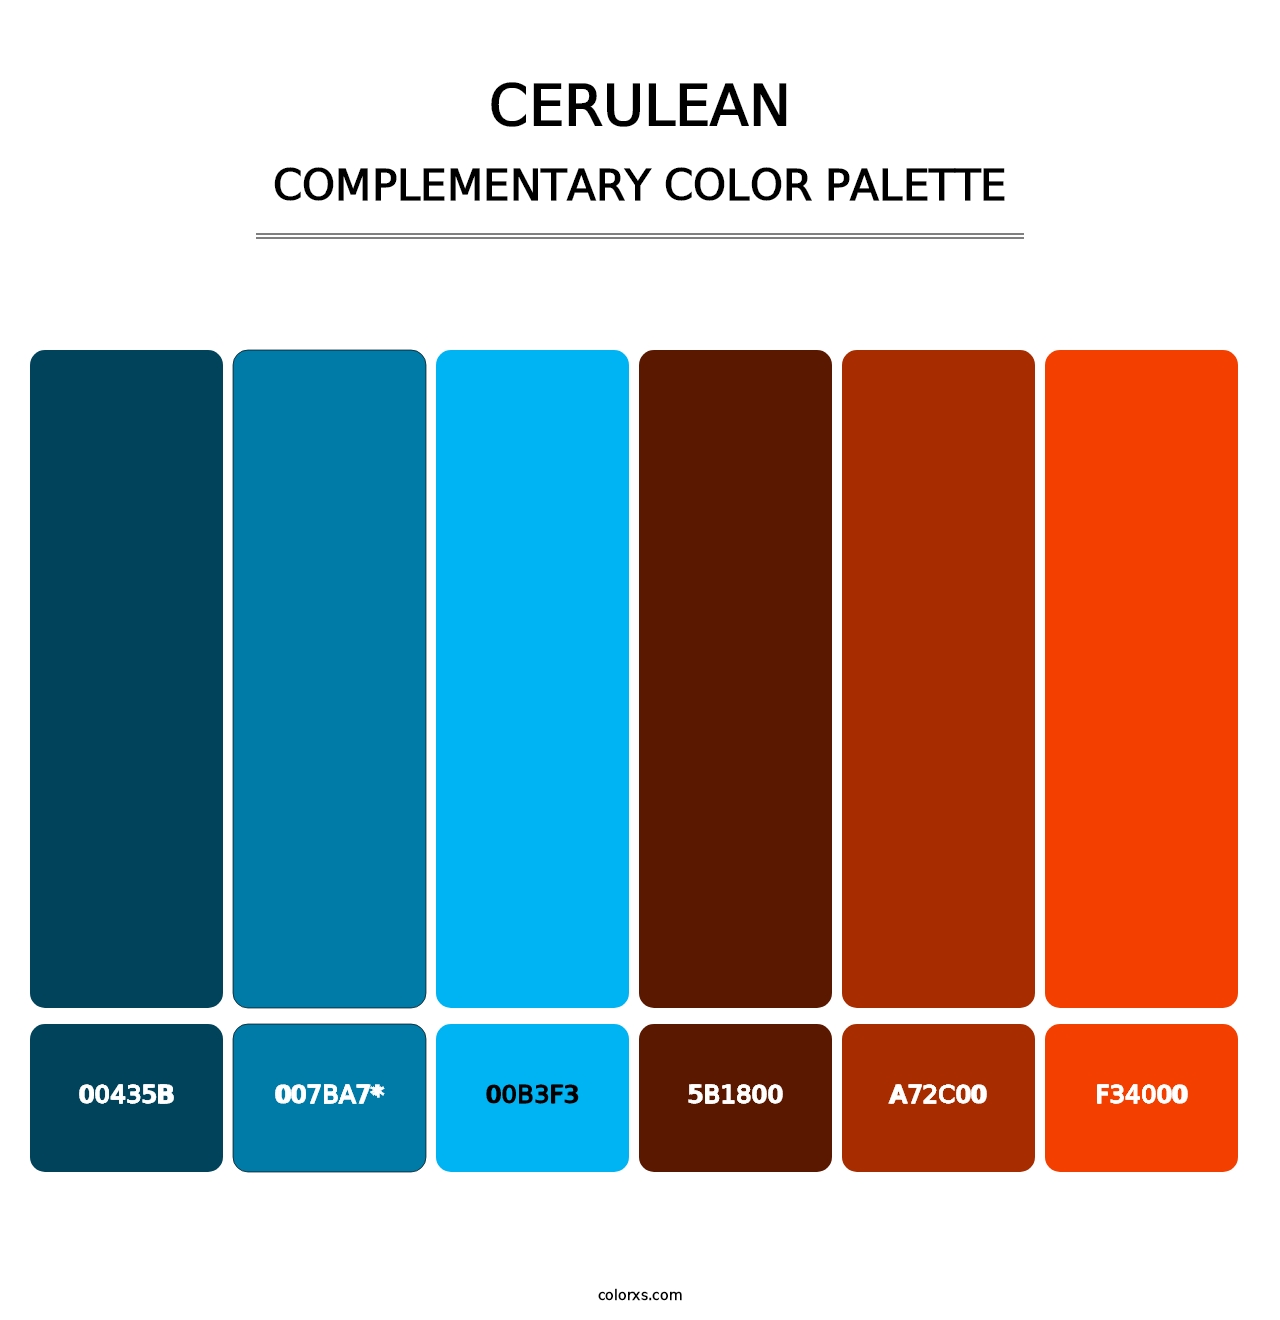 Cerulean - Complementary Color Palette